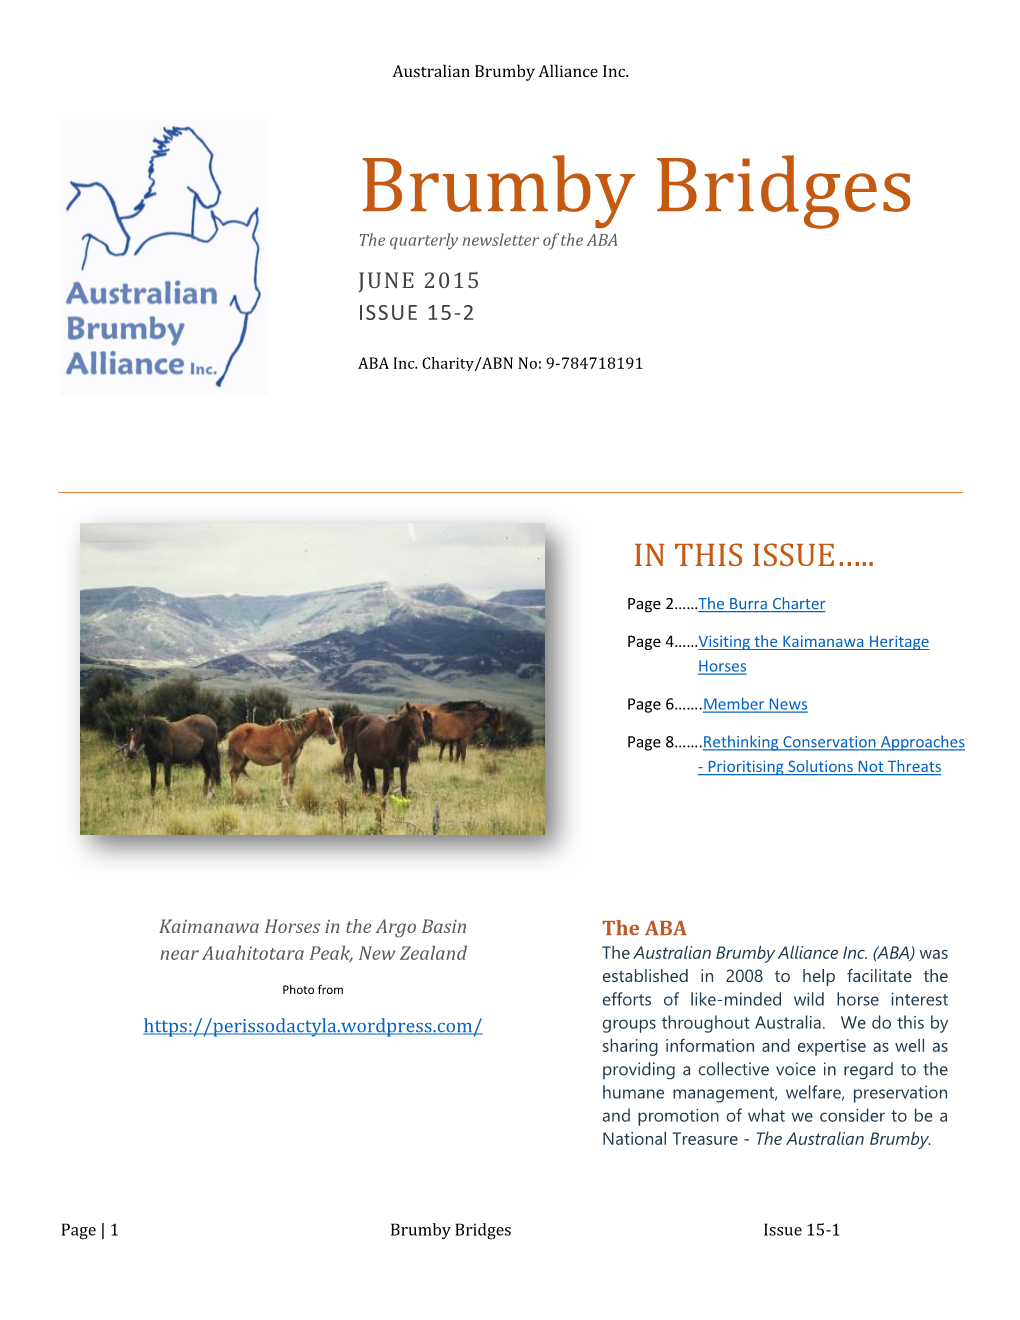 Brumby Bridges the Quarterly Newsletter of the ABA JUNE 2015 ISSUE 15-2